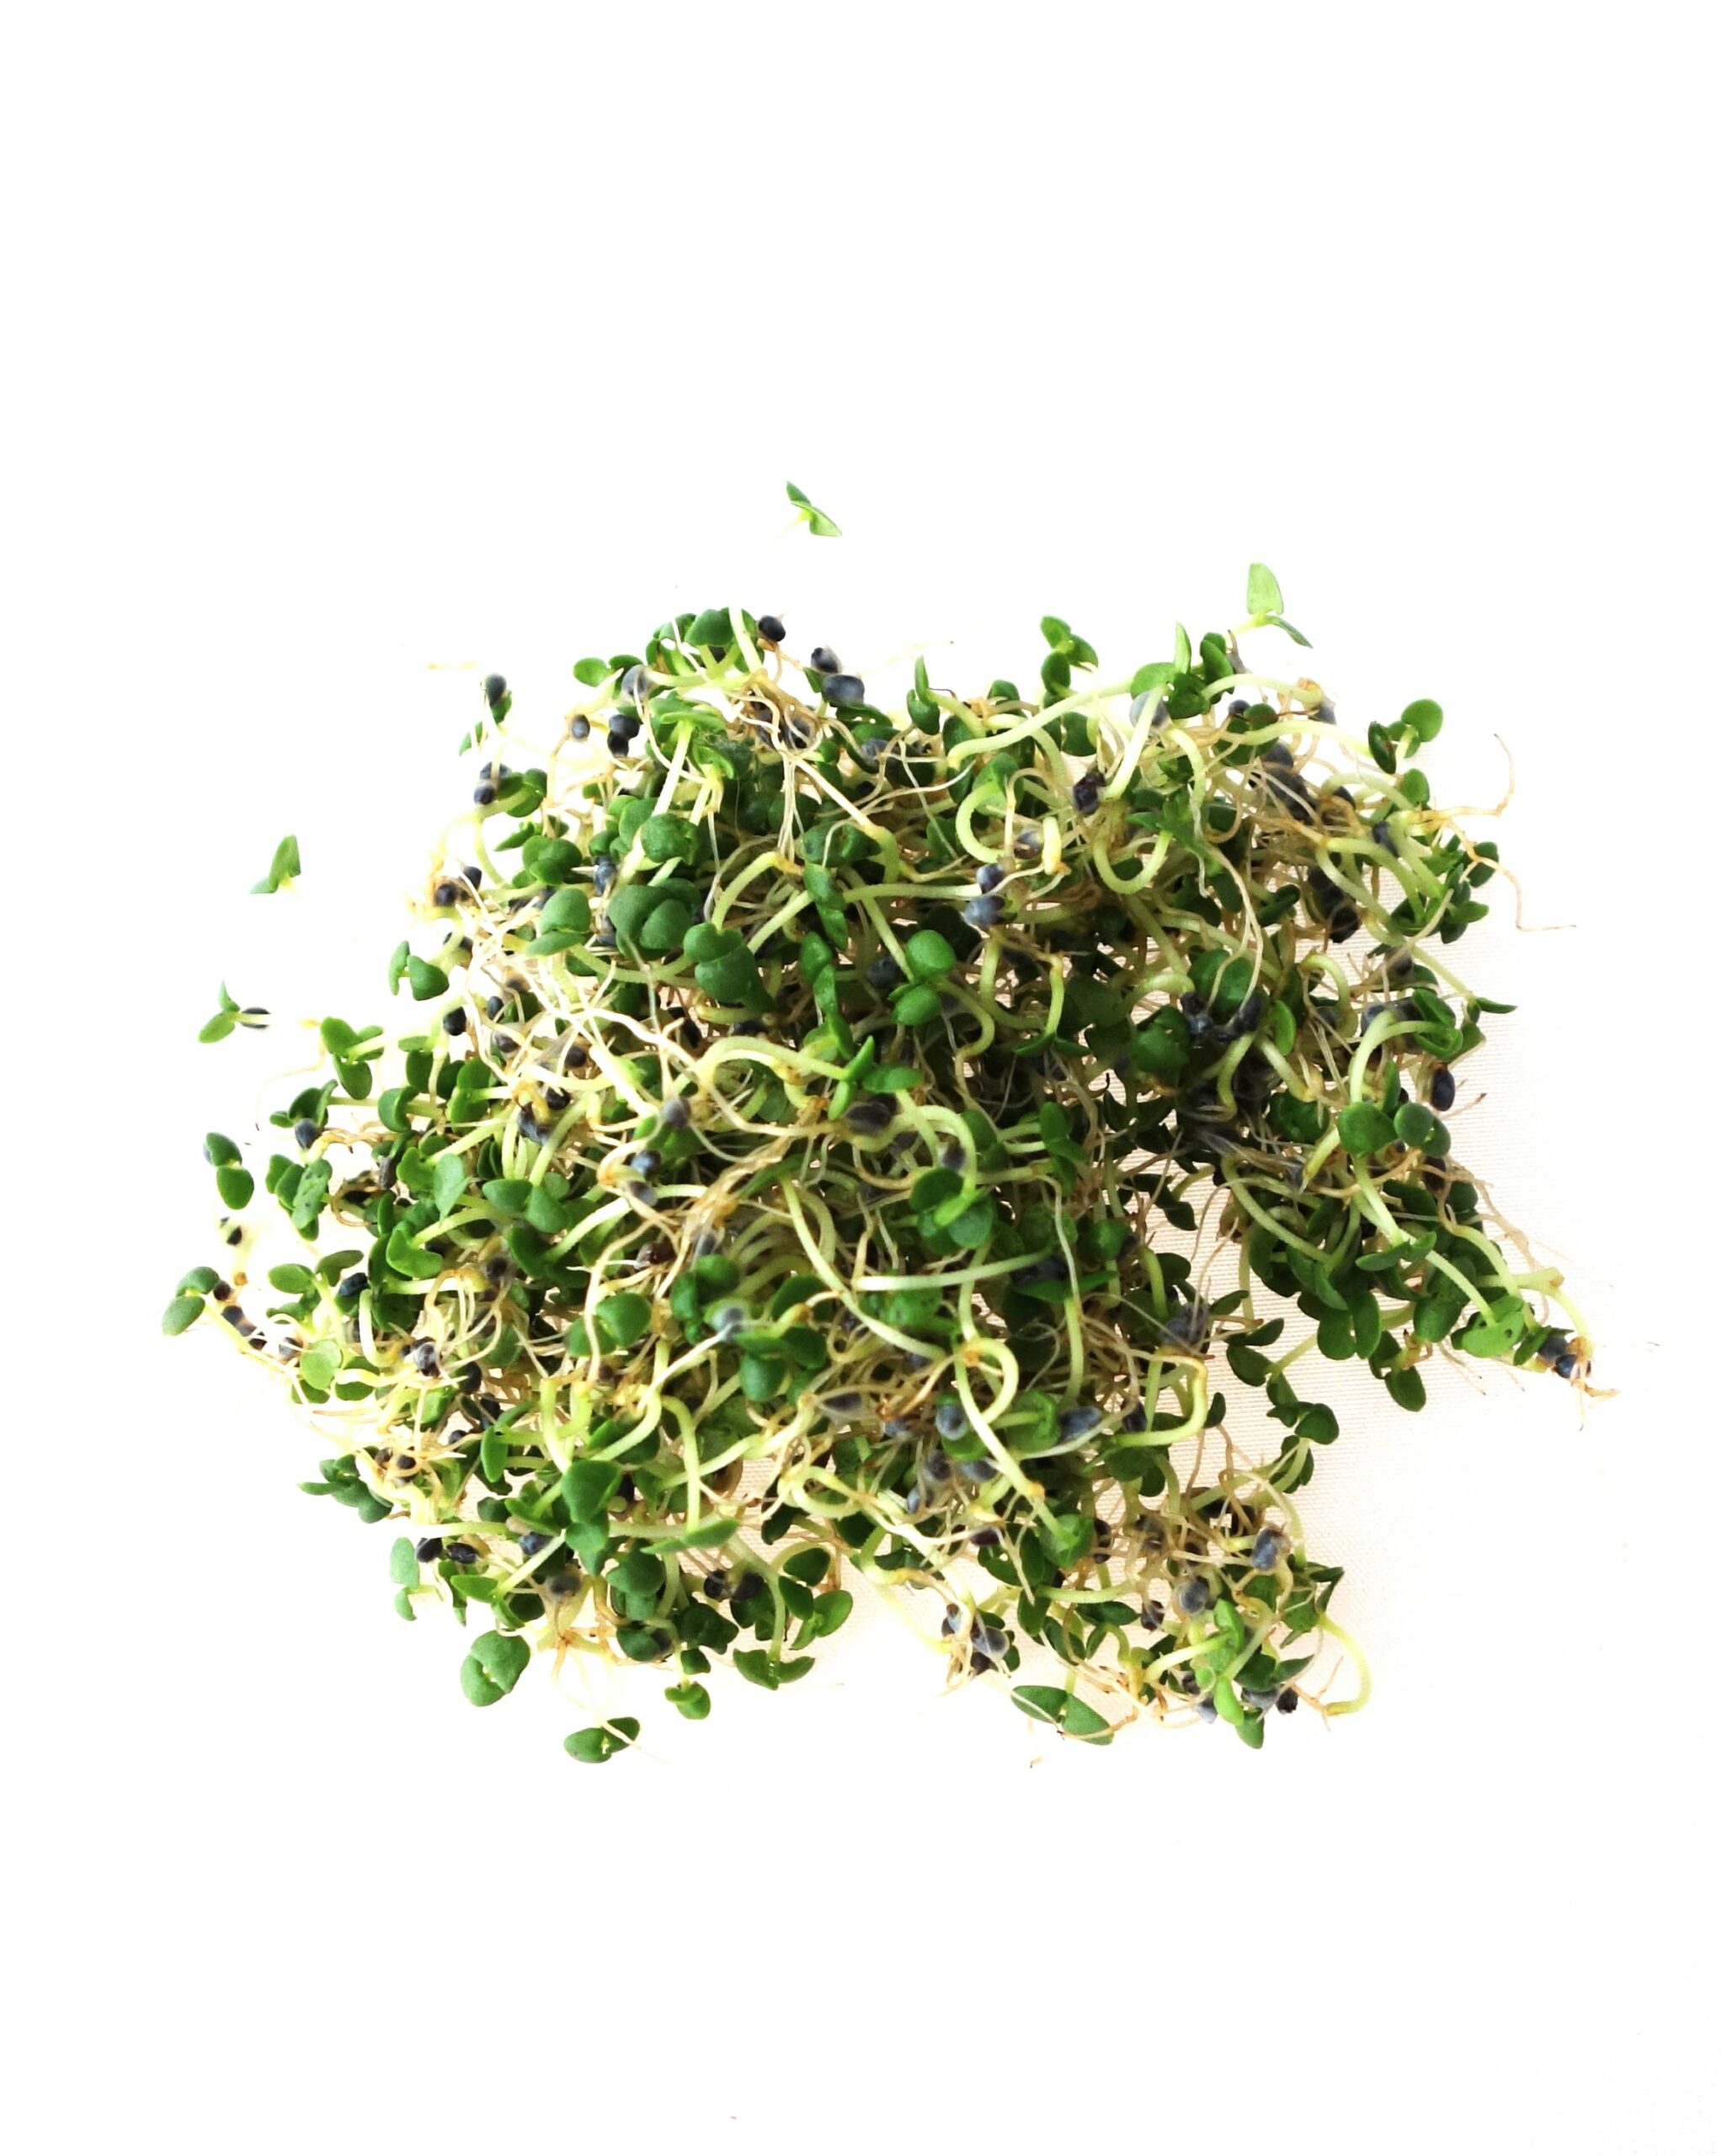 Organic basil sprouts